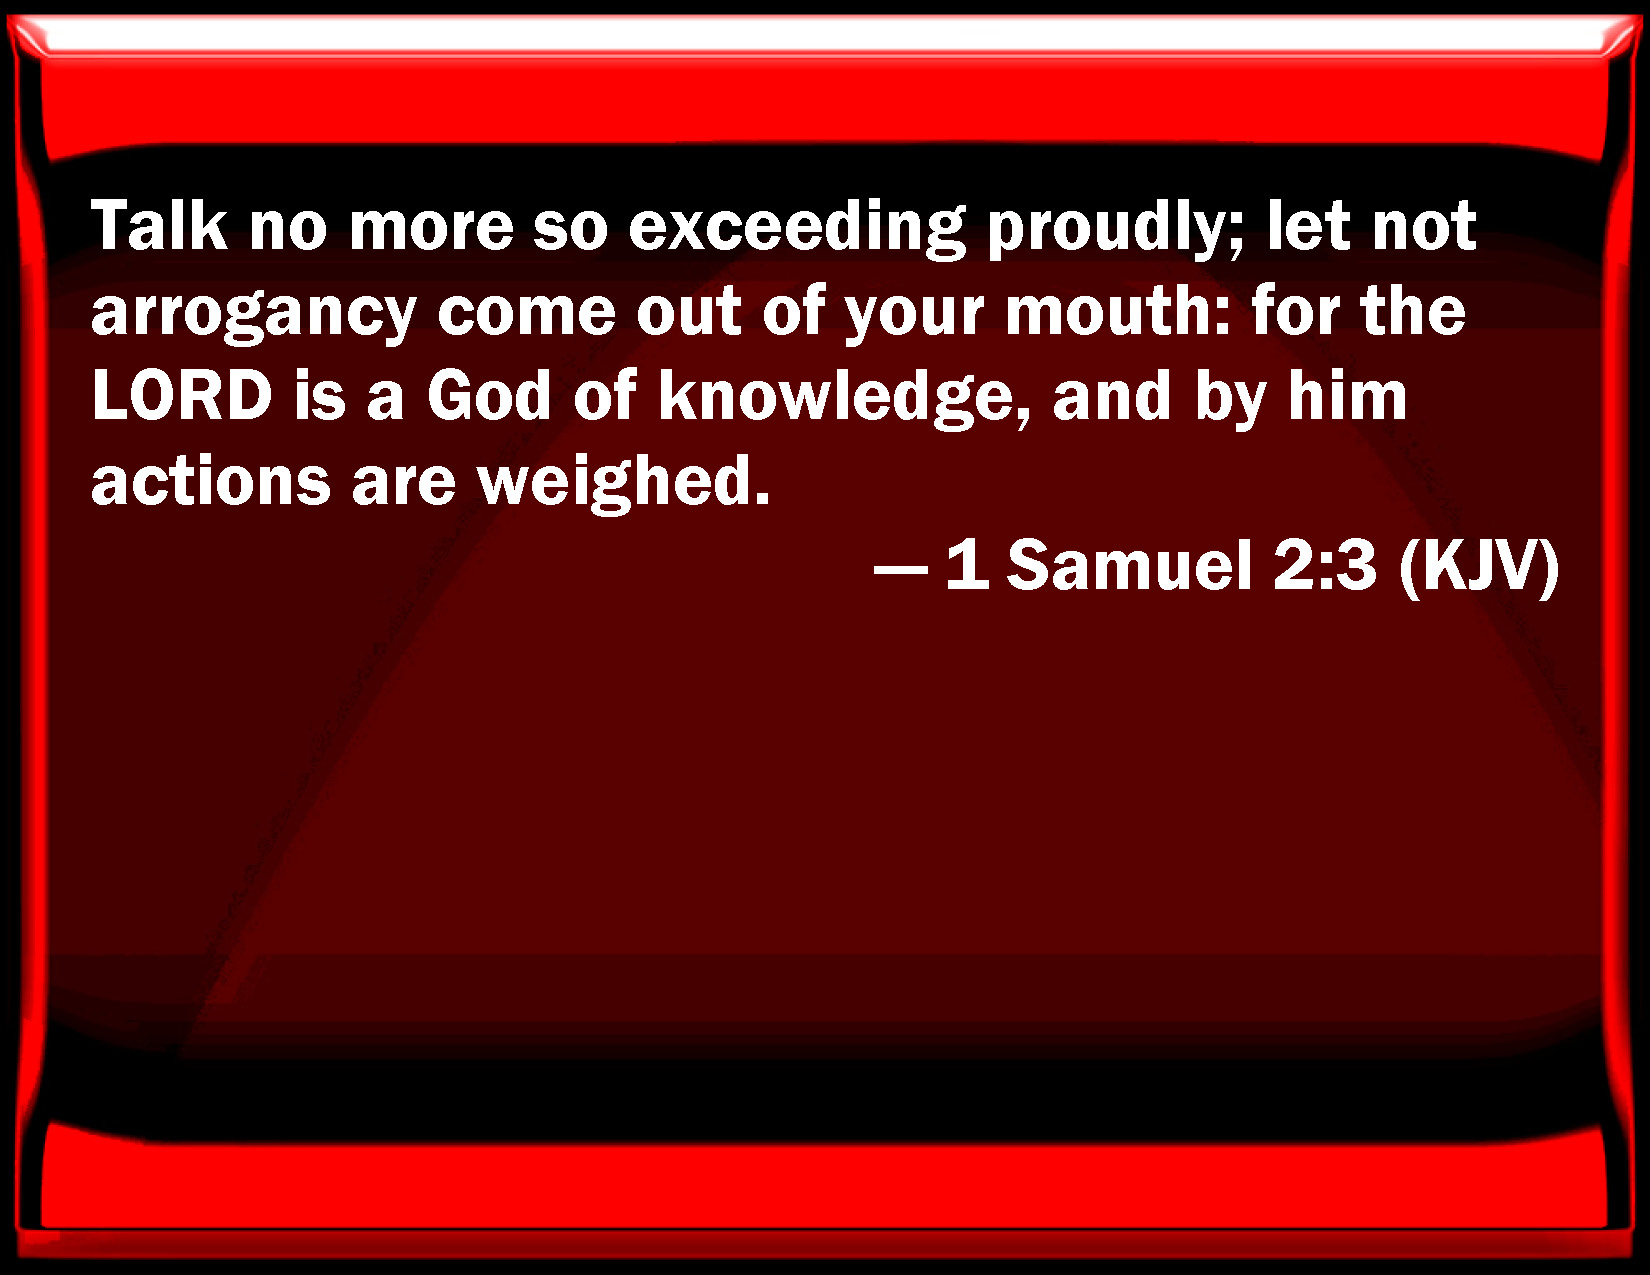 1 Samuel 2:3 Talk no more so exceeding proudly; let not arrogance come out  of your mouth: for the LORD is a God of knowledge, and by him actions are  weighed.